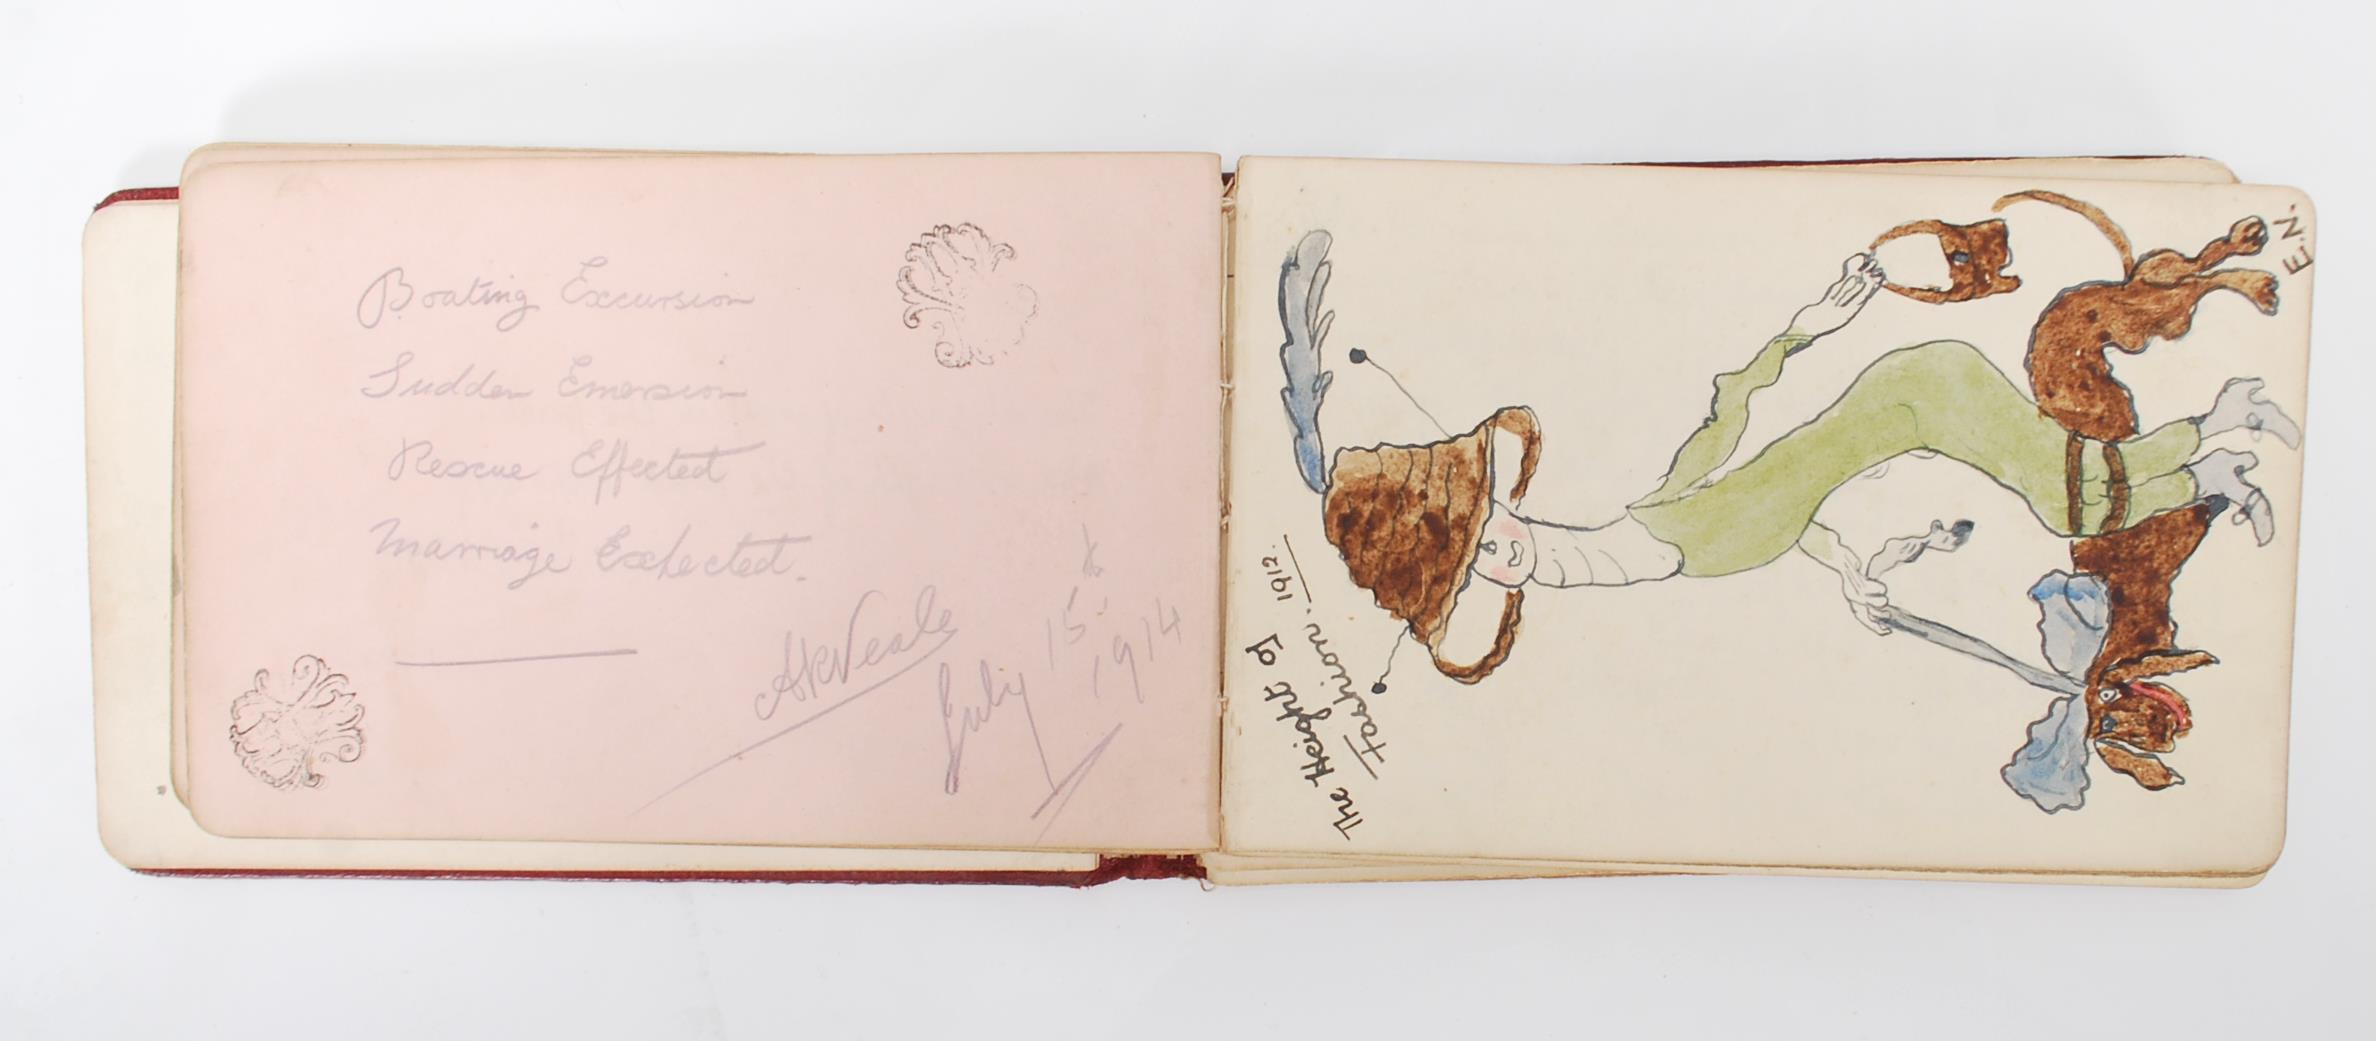 Two autograph books dating to the early 20th Century filled with sketches, poems, prose. dating back - Image 9 of 11